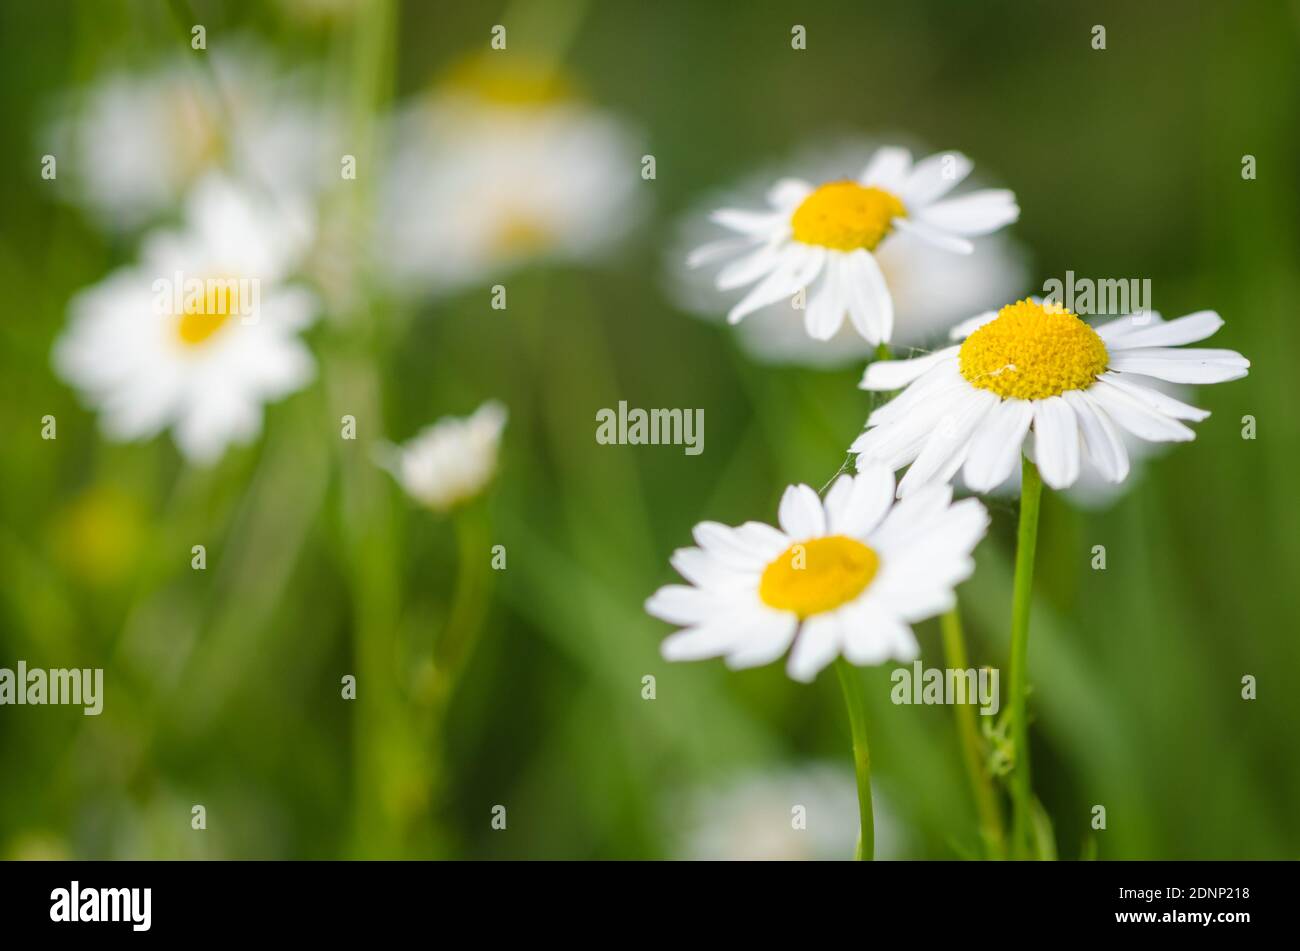 Matricaria chamomilla, flowers known as wild chamomile or mayweed, against green grass background, Germany, Western Europe Stock Photo